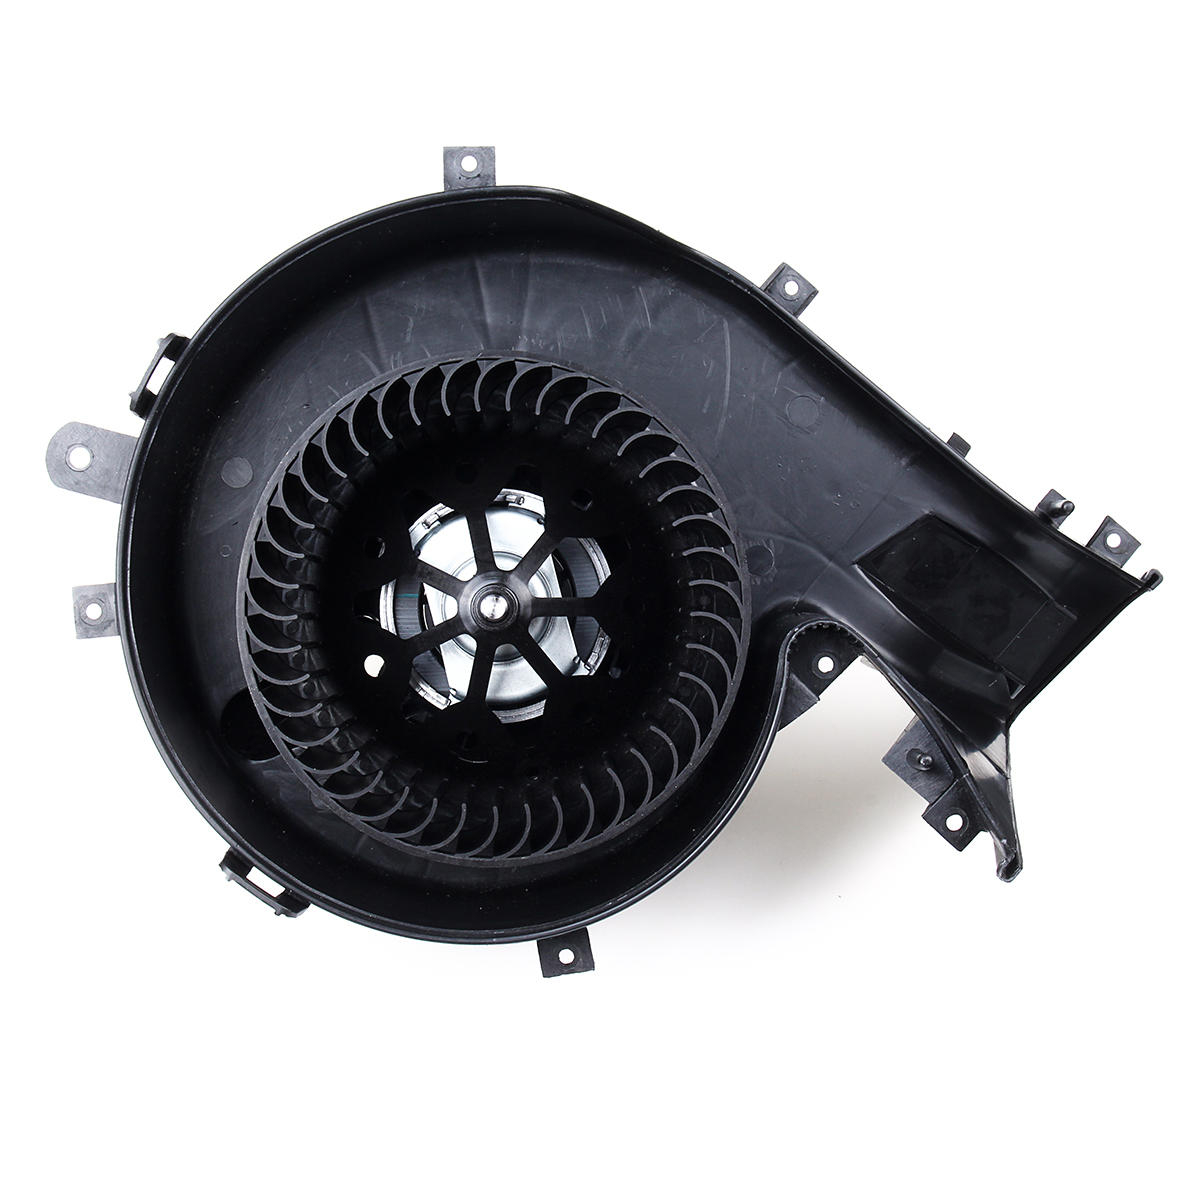 Heater Blower Fan Motor Ac Acc For Saab 9 3 03 12 Vauxhall 13250116 13250118 13221348 12799559 throughout proportions 1200 X 1200